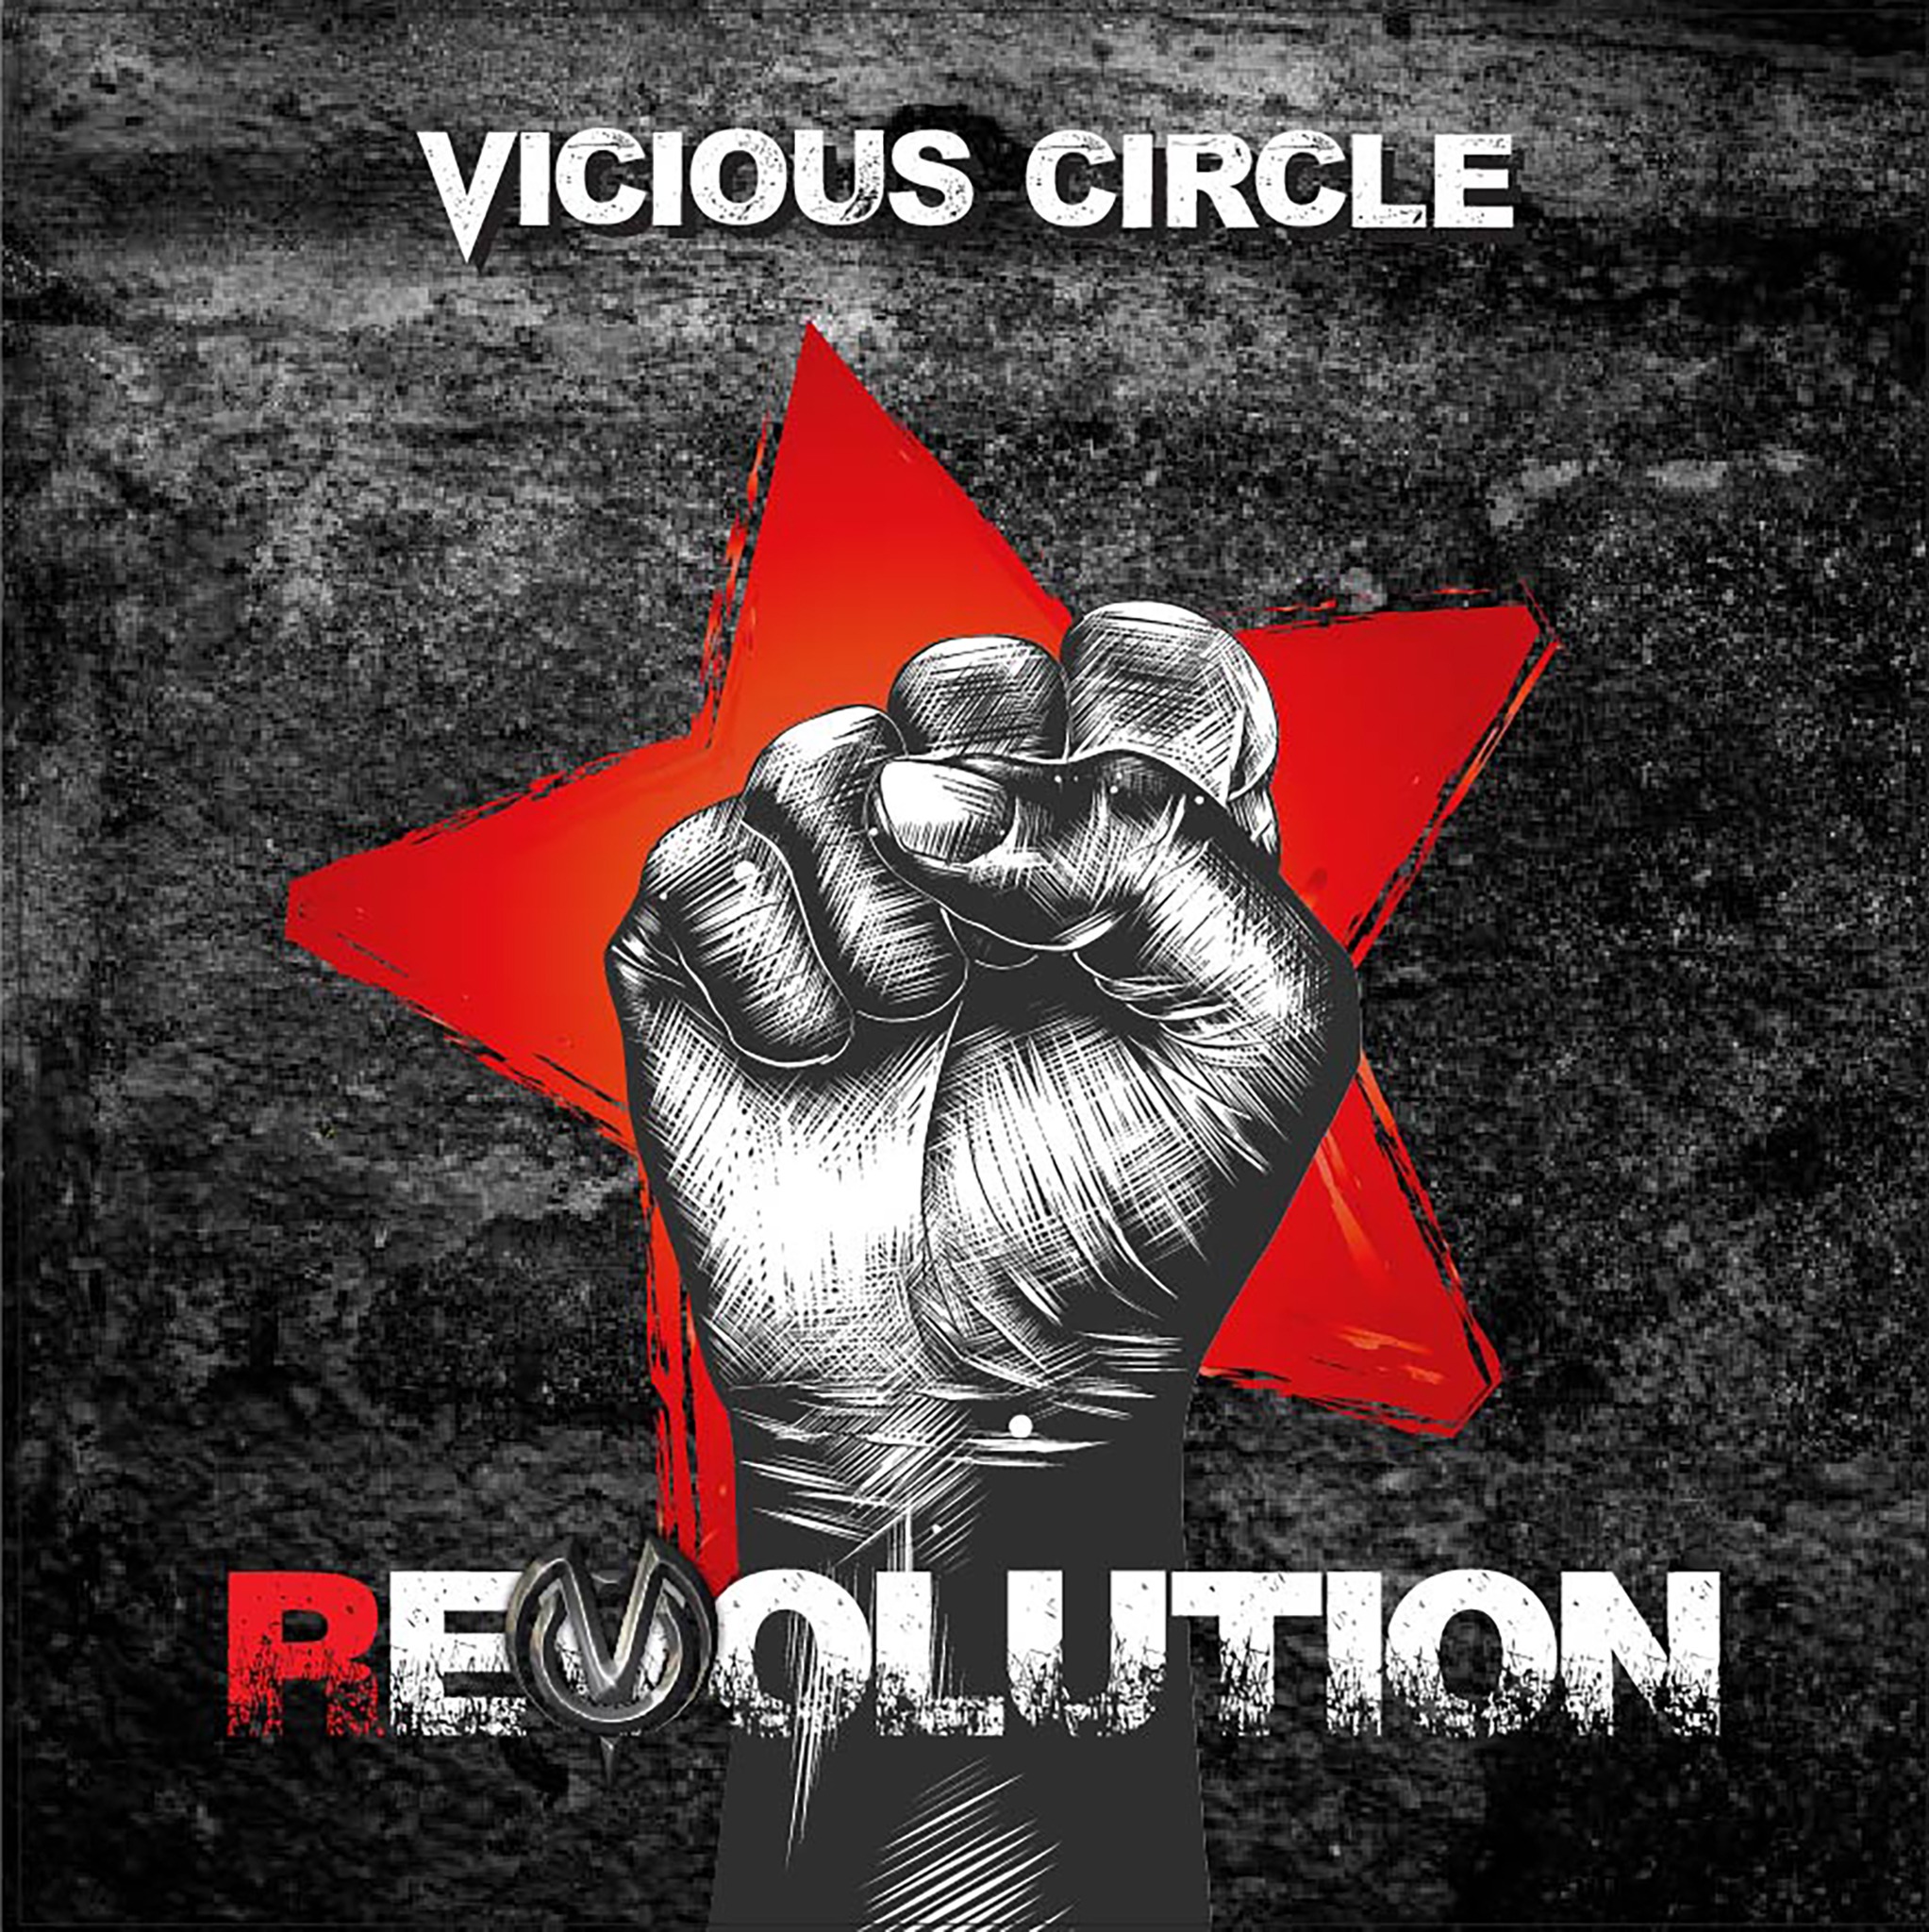 Ushering an Exciting New Era in Rock Music - Vicious Circle Announces The Release of Their Second Album